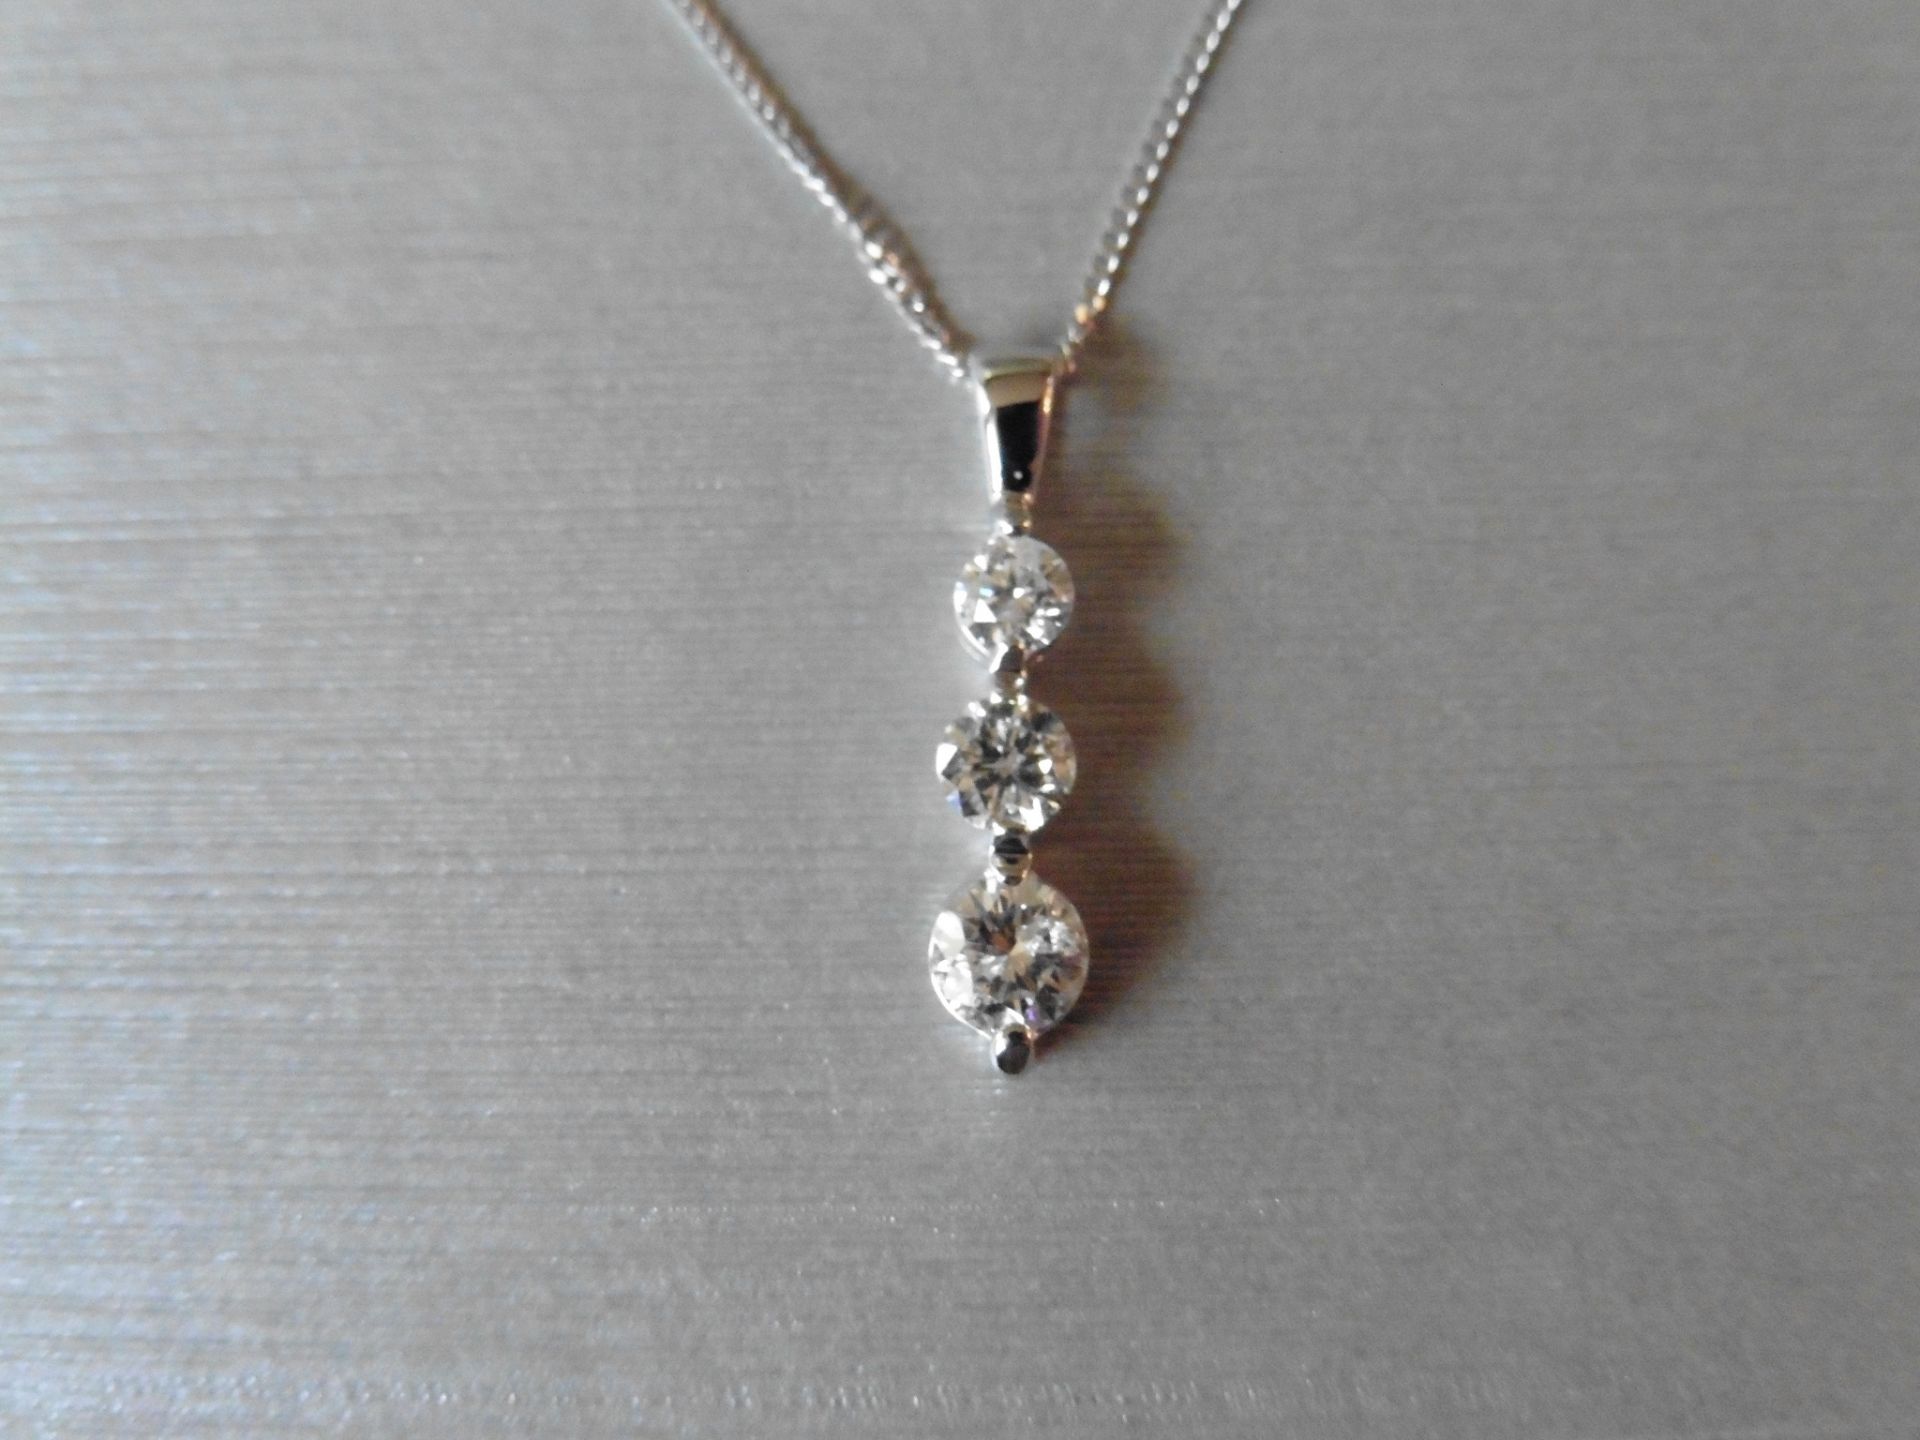 Trilogy style pendant set with 3 graduated brilliant cut diamonds, H/I colour, Si3 clarity, weighing